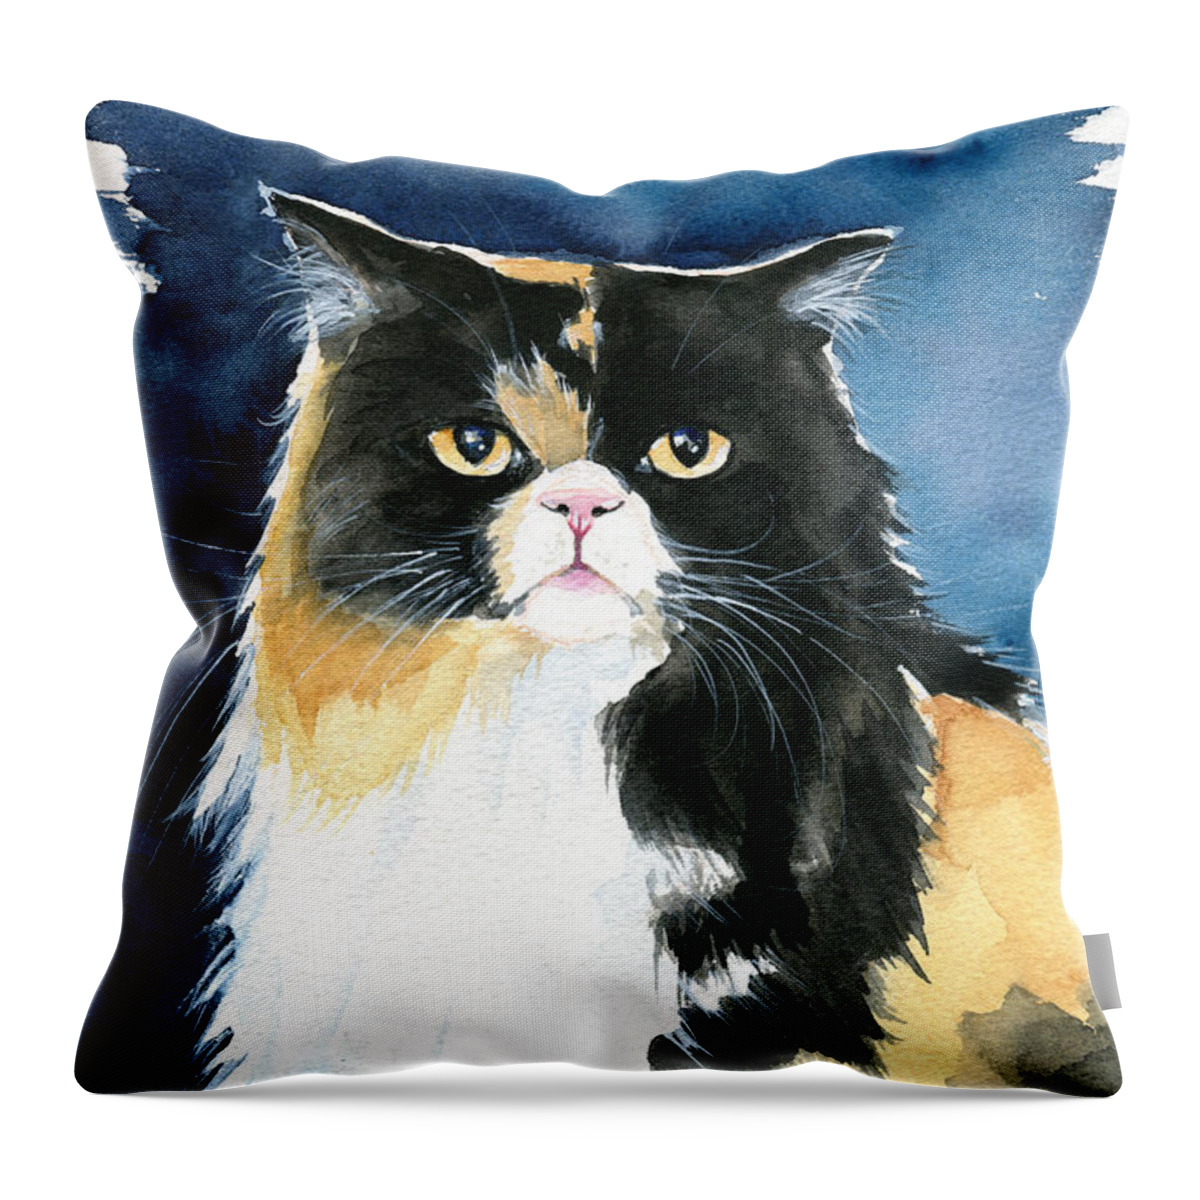 Cat Throw Pillow featuring the painting Pumpy Persian Princess by Dora Hathazi Mendes